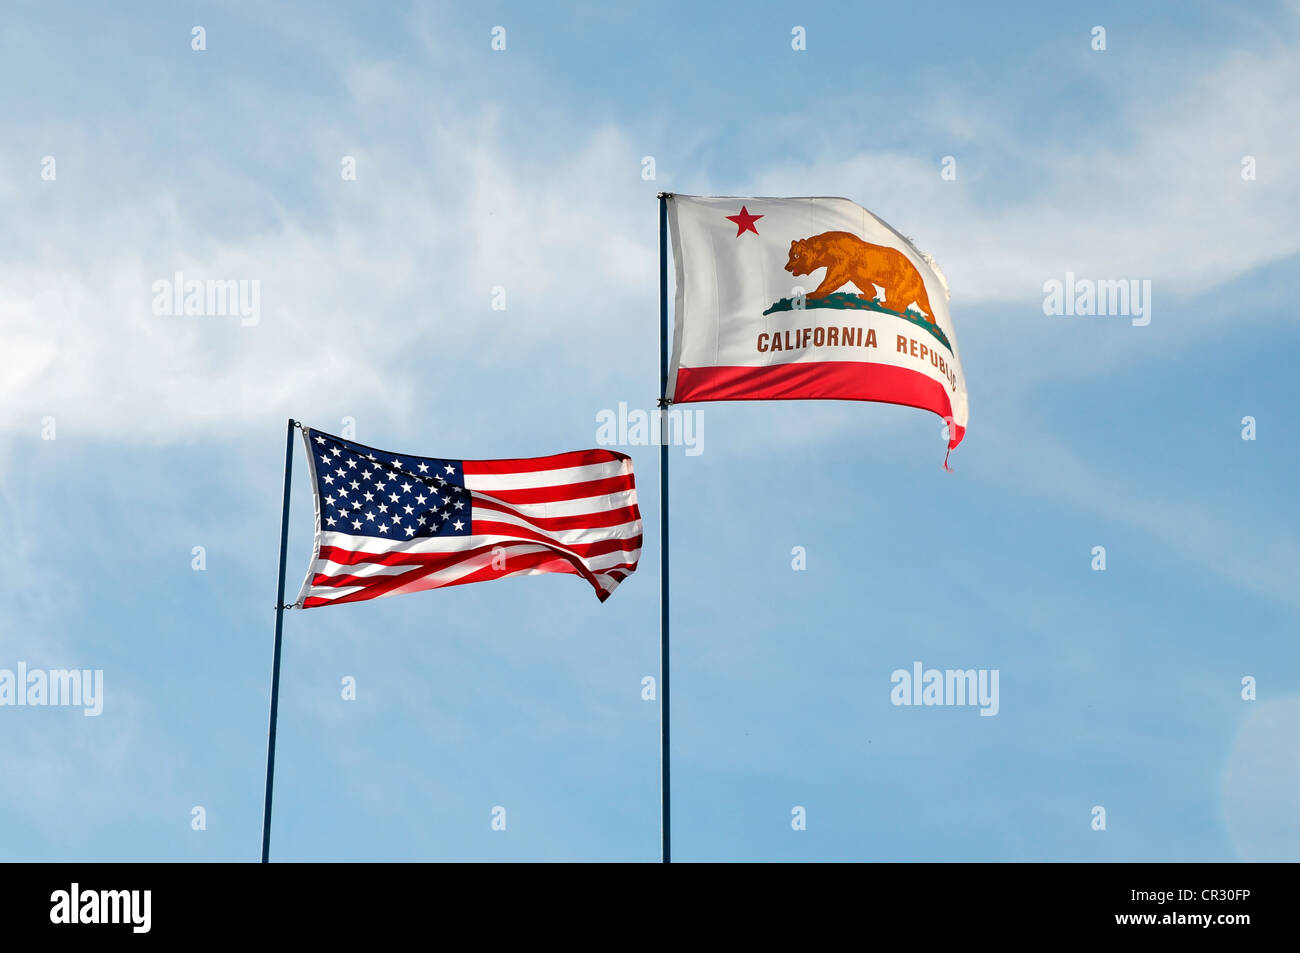 Flags of the United States of America and the Republic of California, USA Stock Photo